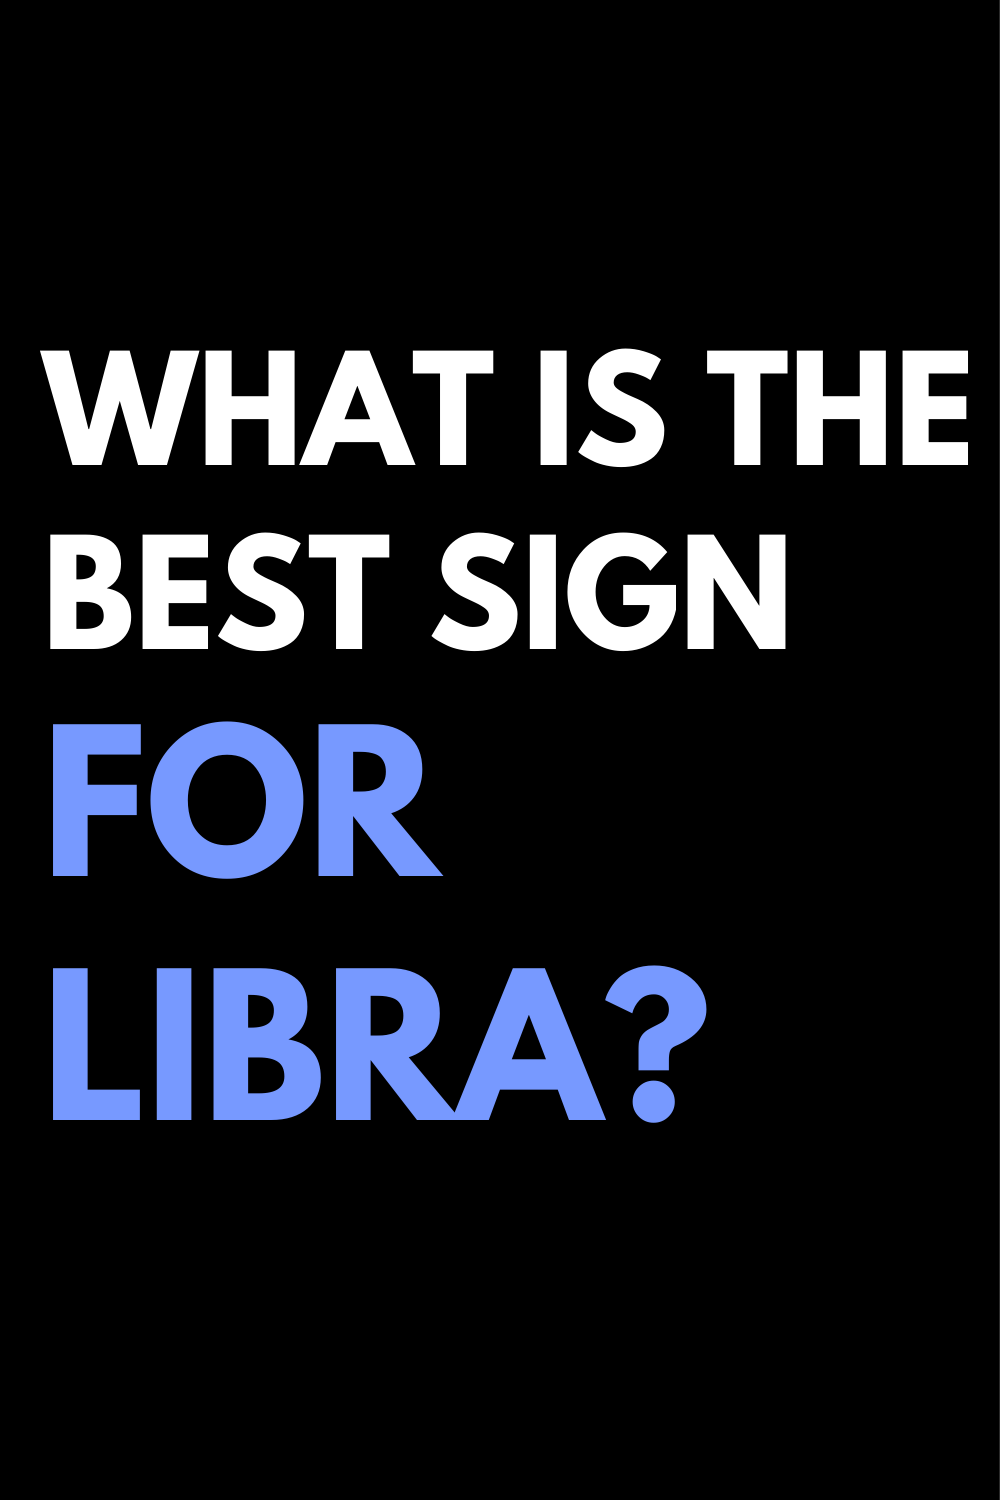 What is the best sign for Libra?